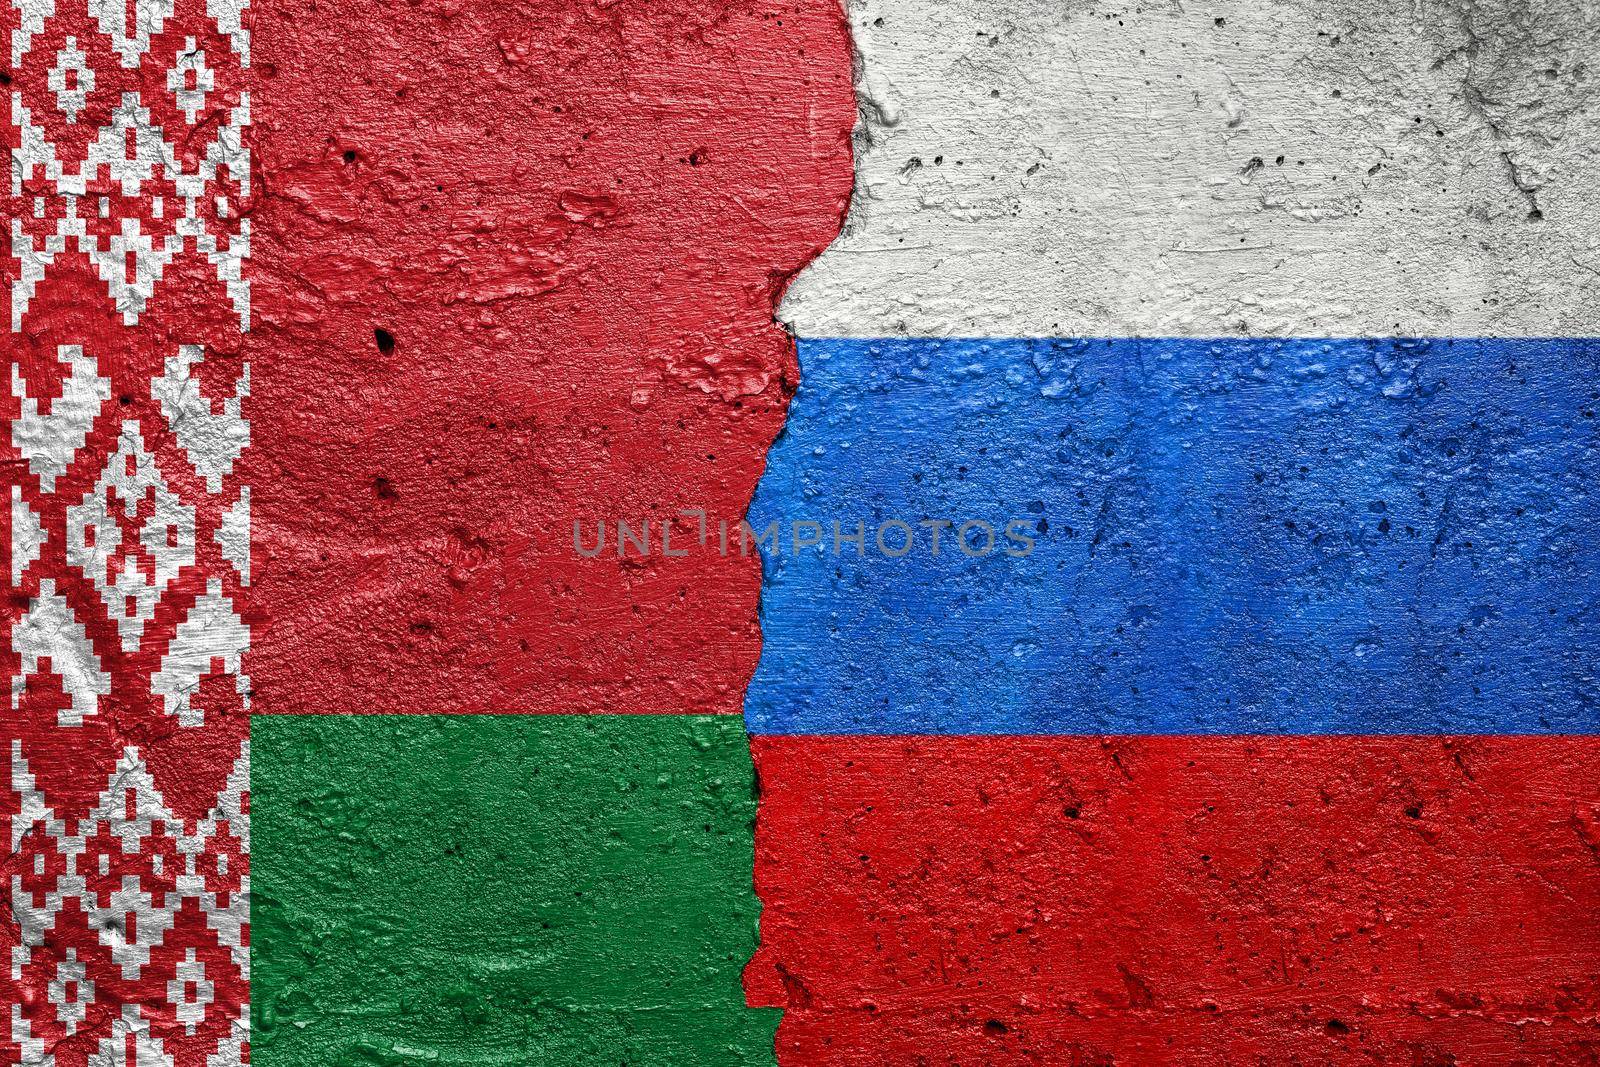 Belarus and Russia - Cracked concrete wall painted with a Belarusian flag on the left and a Russian flag on the right